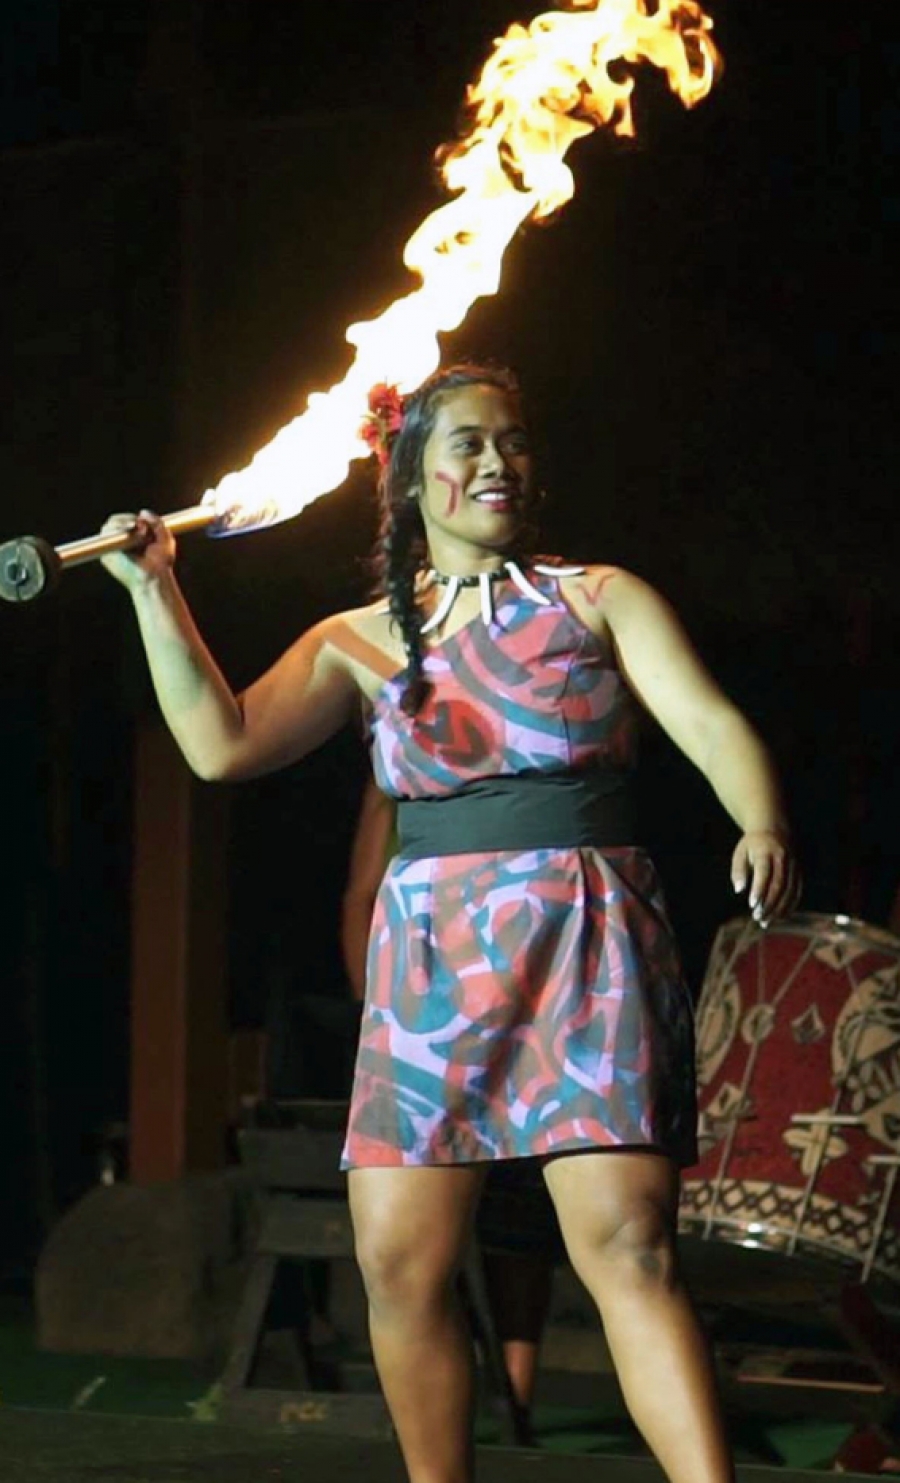 Jeralee hits the hot spot in world dancing contest